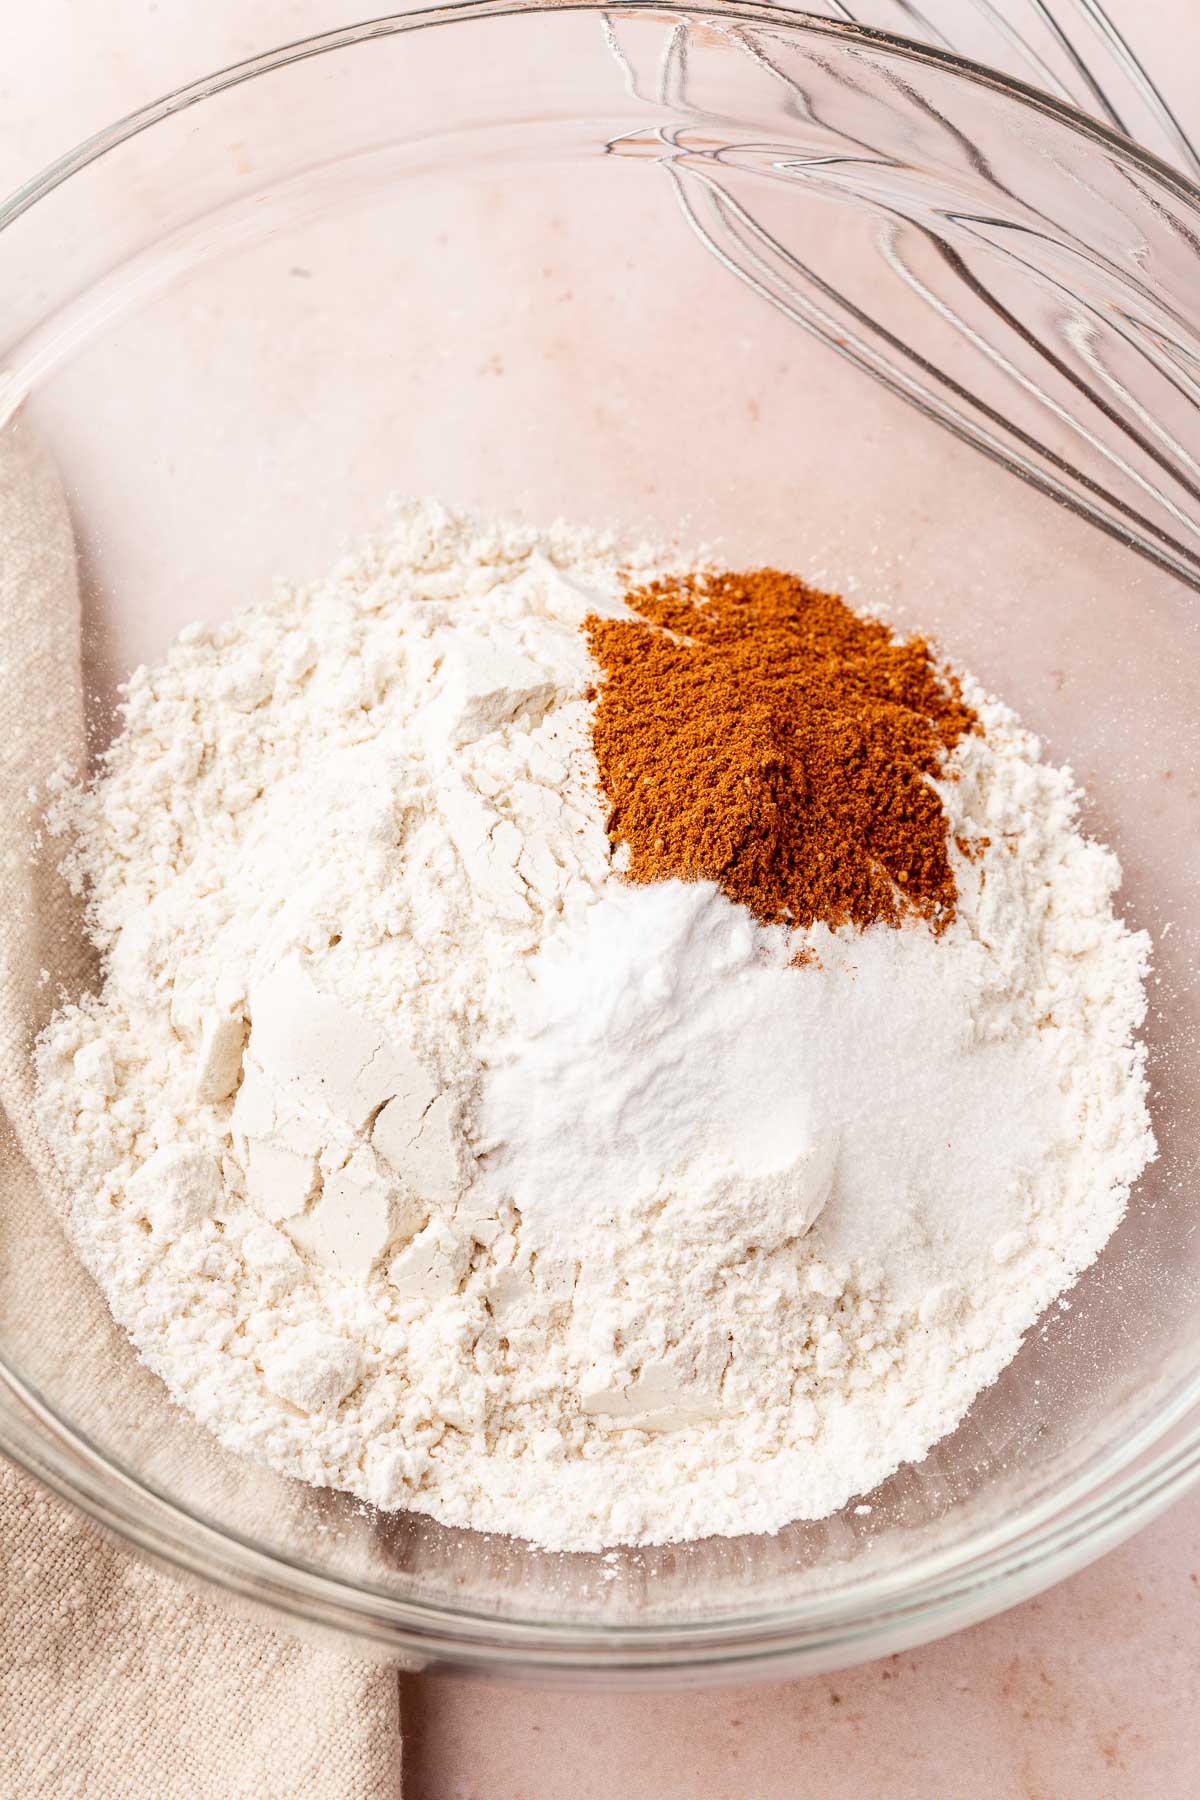 A glass mixing bowl with gluten-free flour, baking soda, baking powder, salt and pumpkin pie spice before whisking together.